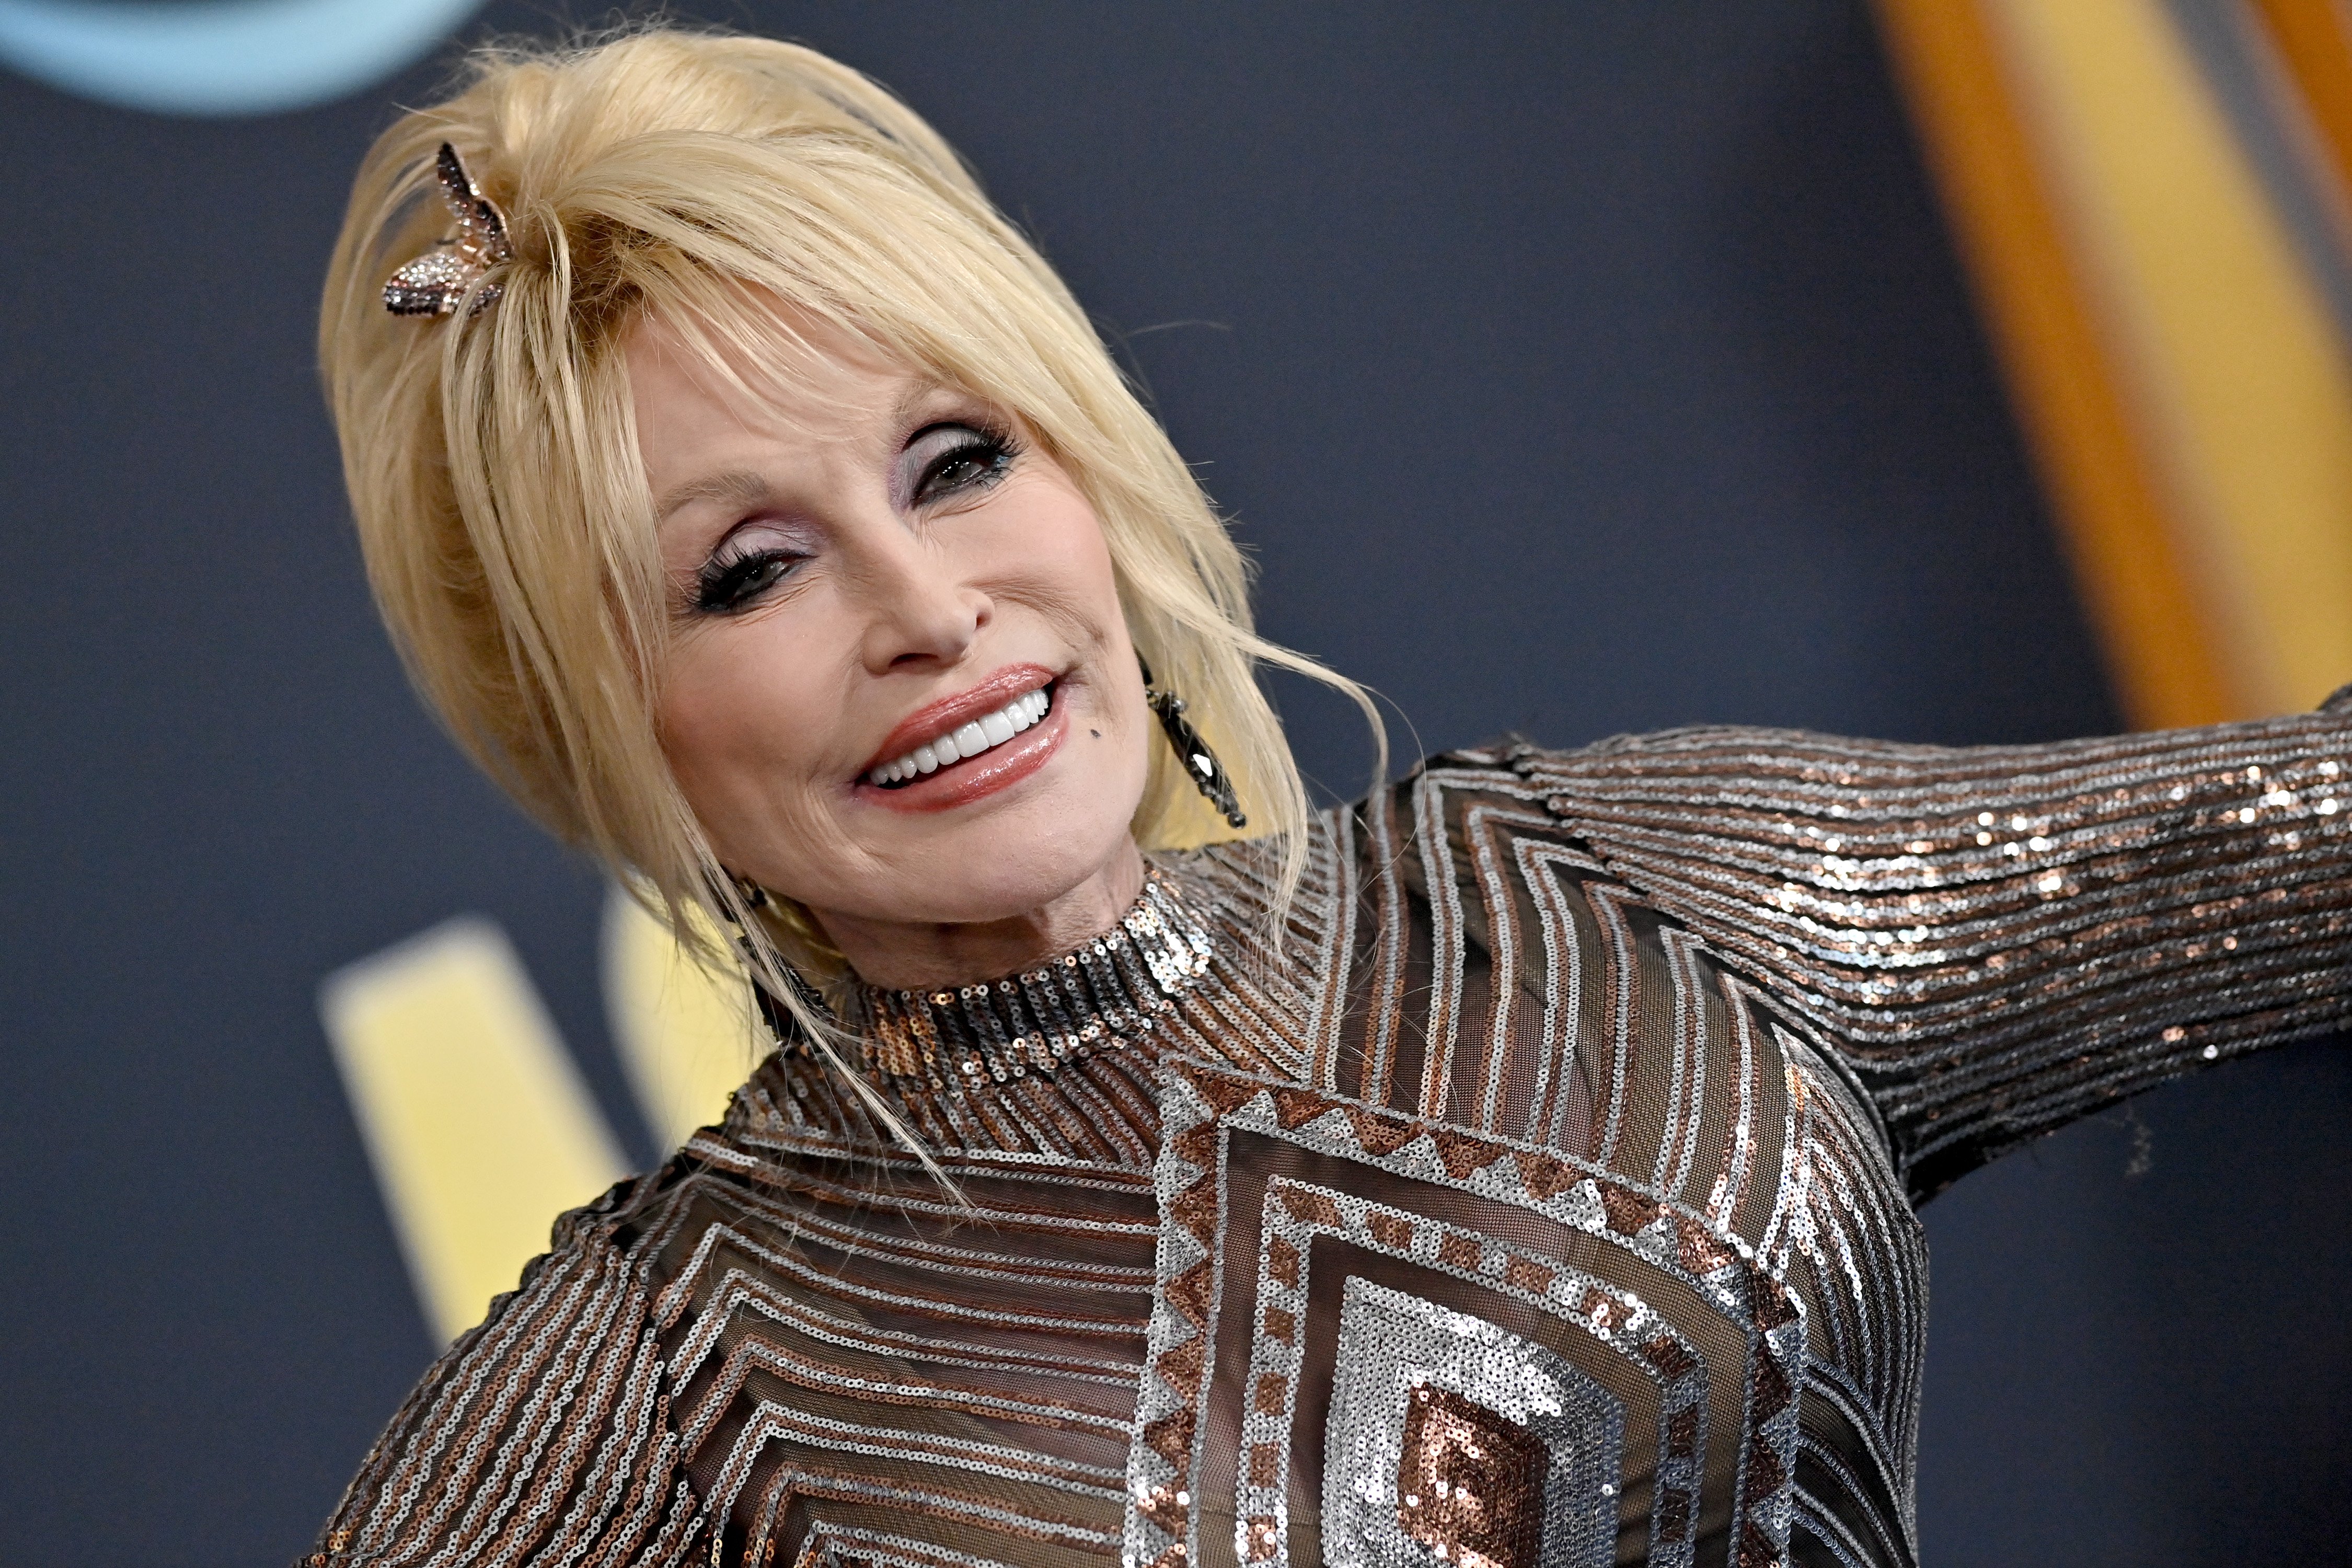 Singer-songwriter Dolly Parton attending the 57th Academy of Country Music Awards on March 7, 2022 in Las Vegas, Nevada. | Source: Getty Images